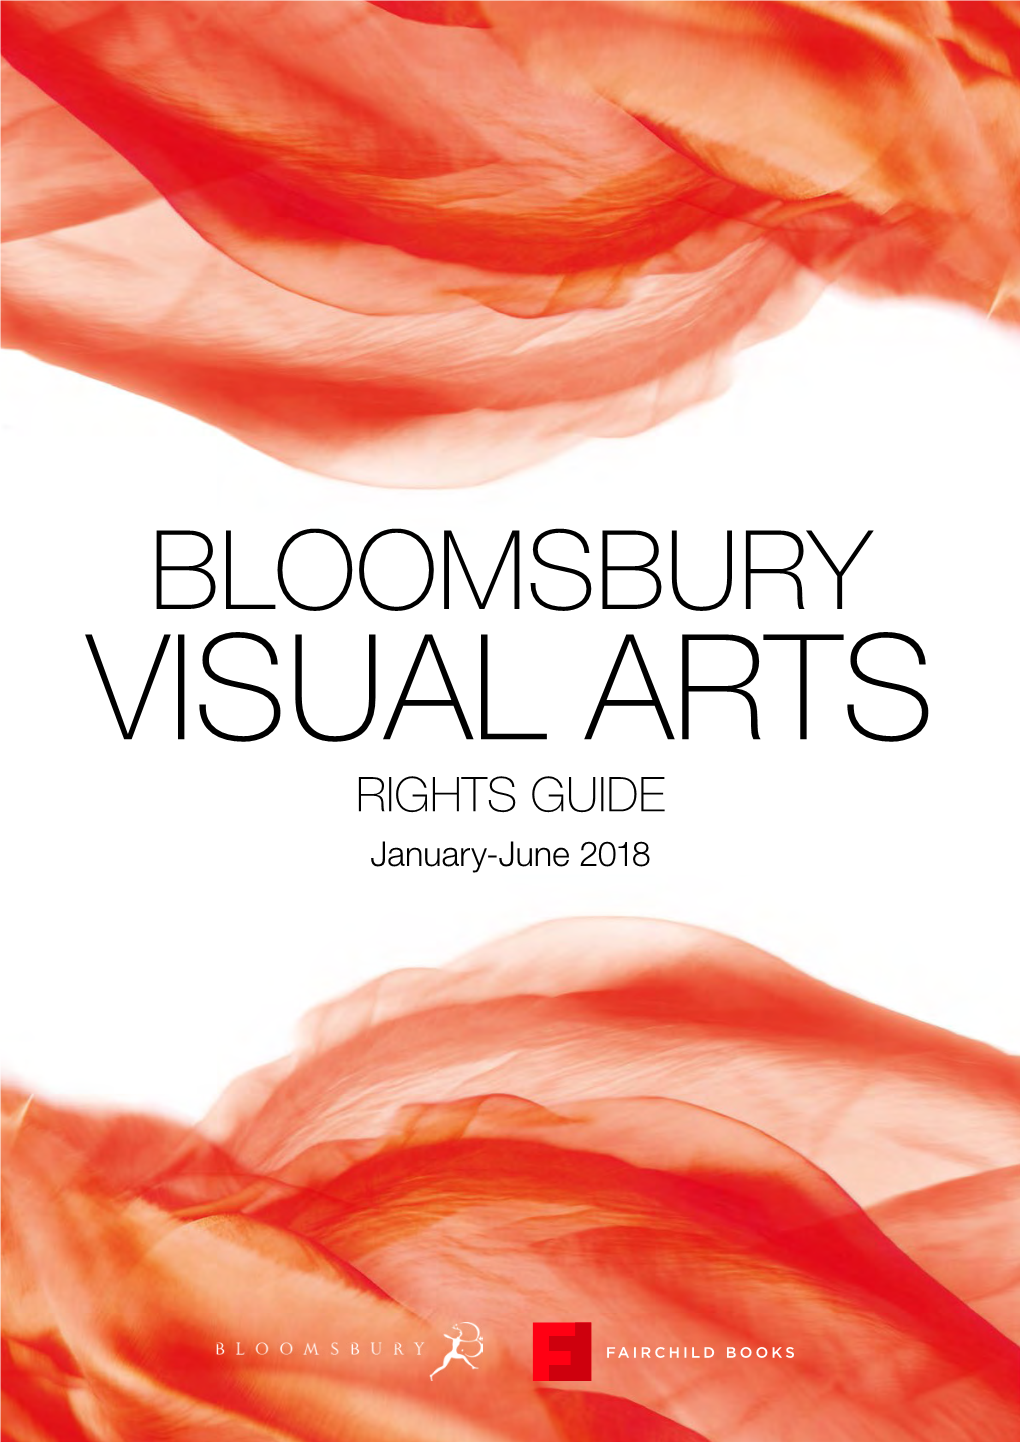 VISUAL ARTS RIGHTS GUIDE January-June 2018 Contents